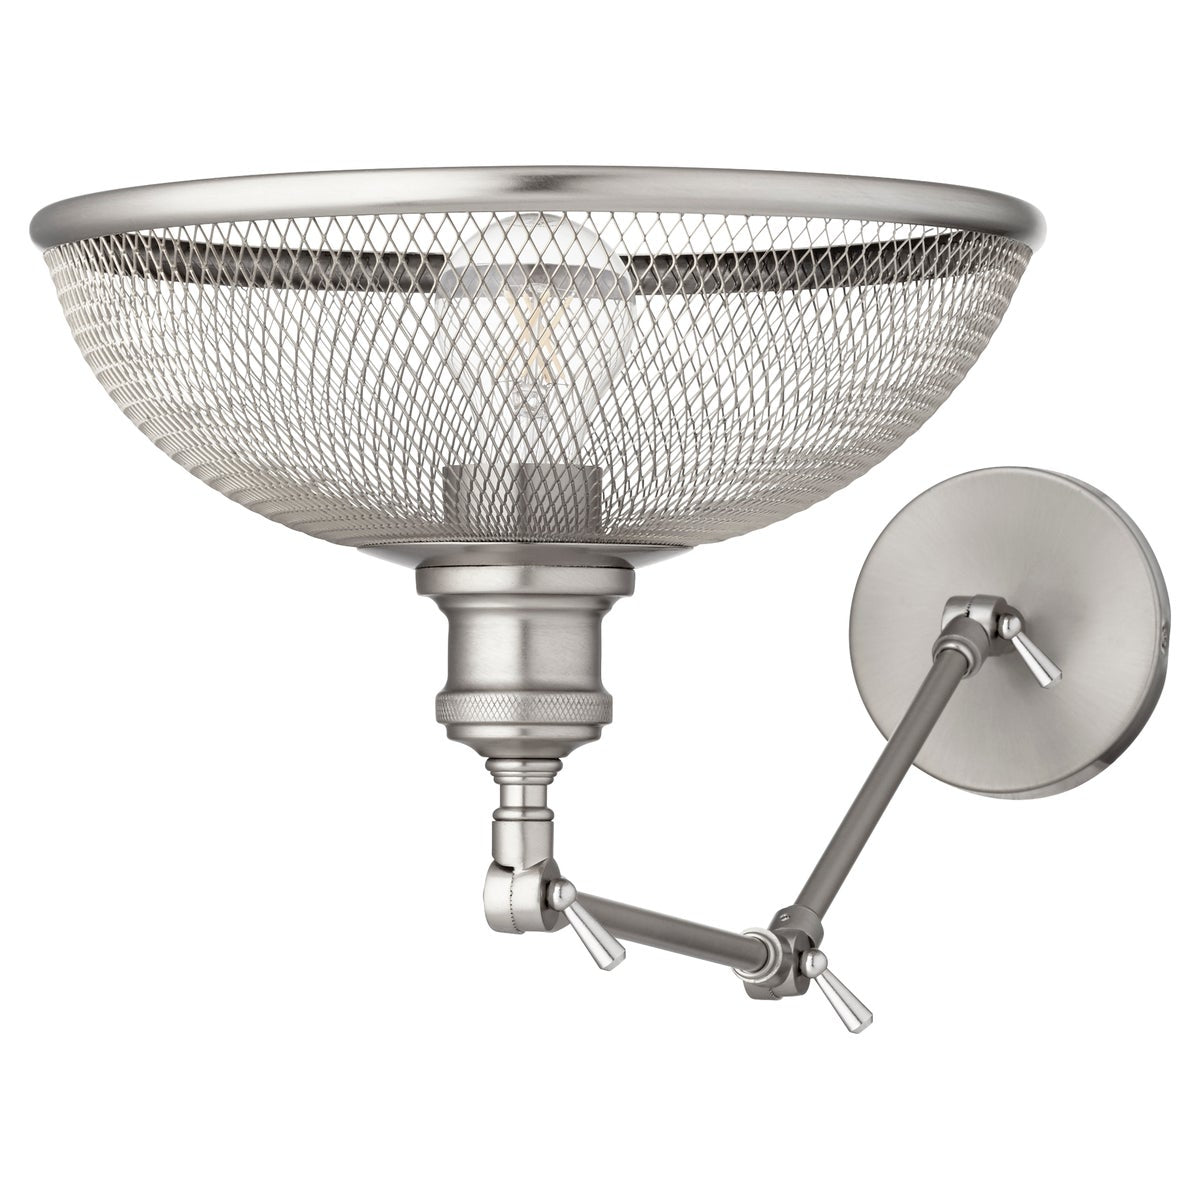 Industrial Wall Sconce with wire mesh shade, showcasing crisscross patterns and repeating angles. Versatile and transitional, this Quorum International lighting fixture amplifies design and subtly shaded bulbs. 12"W x 11.5"H x 24"E.